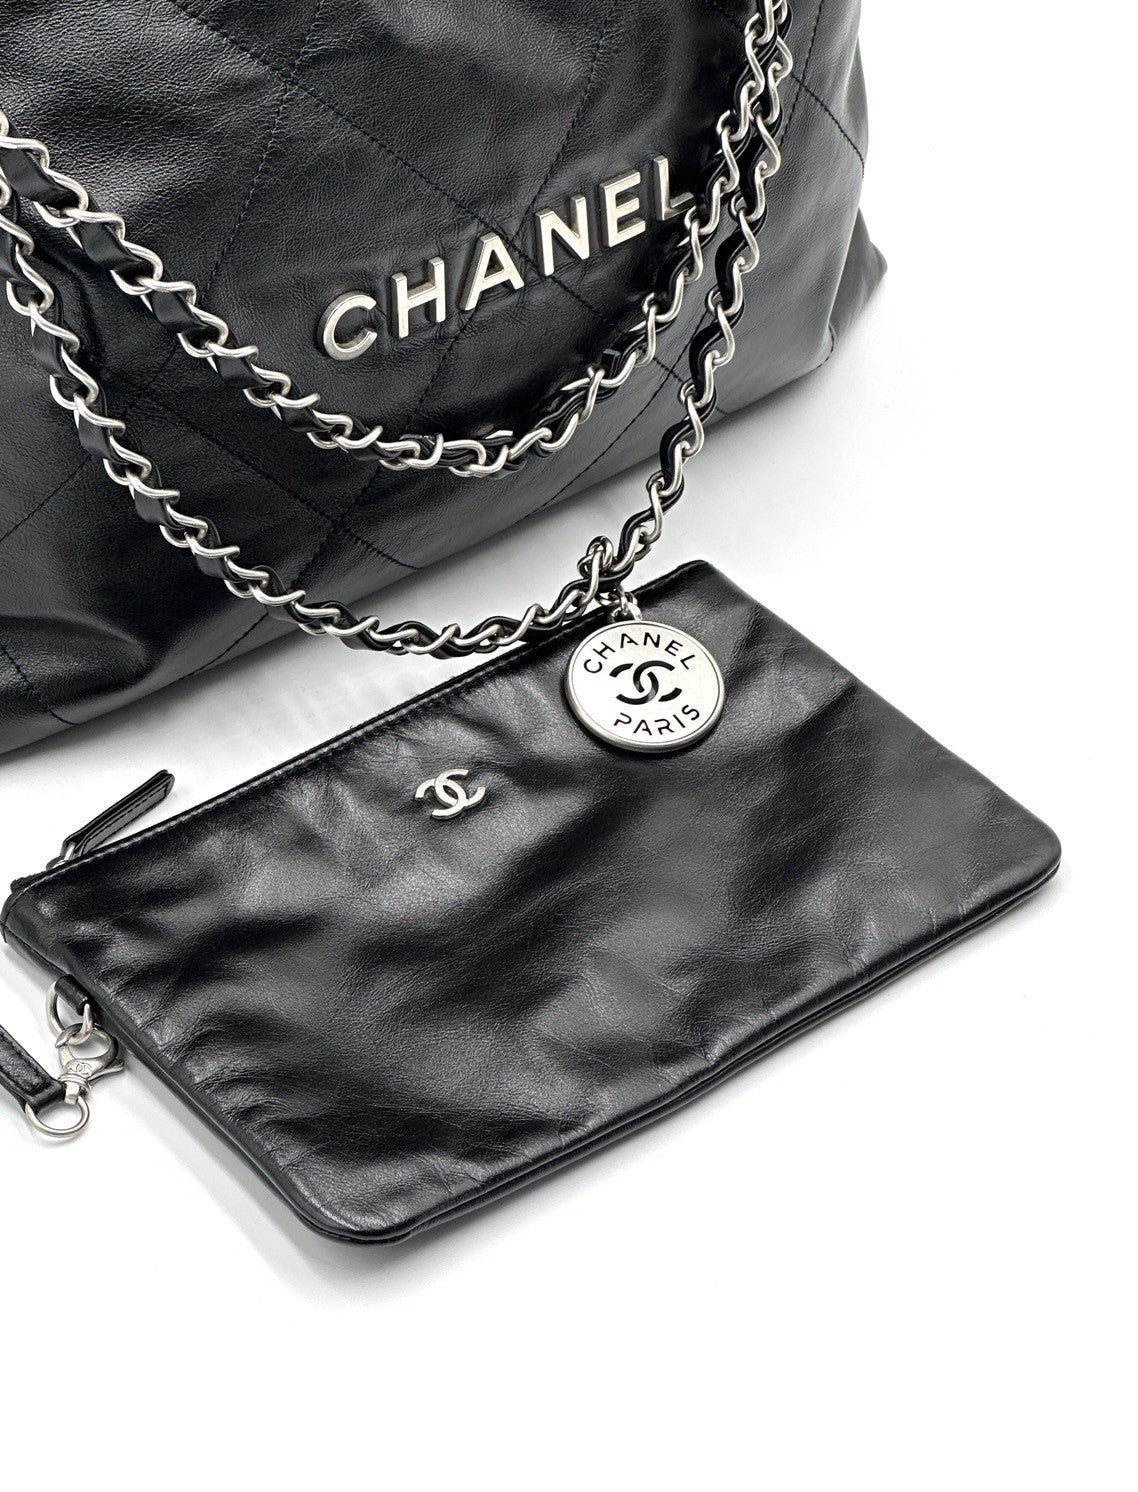 【Preowned】CHANEL 22 Bag - 黑銀中號